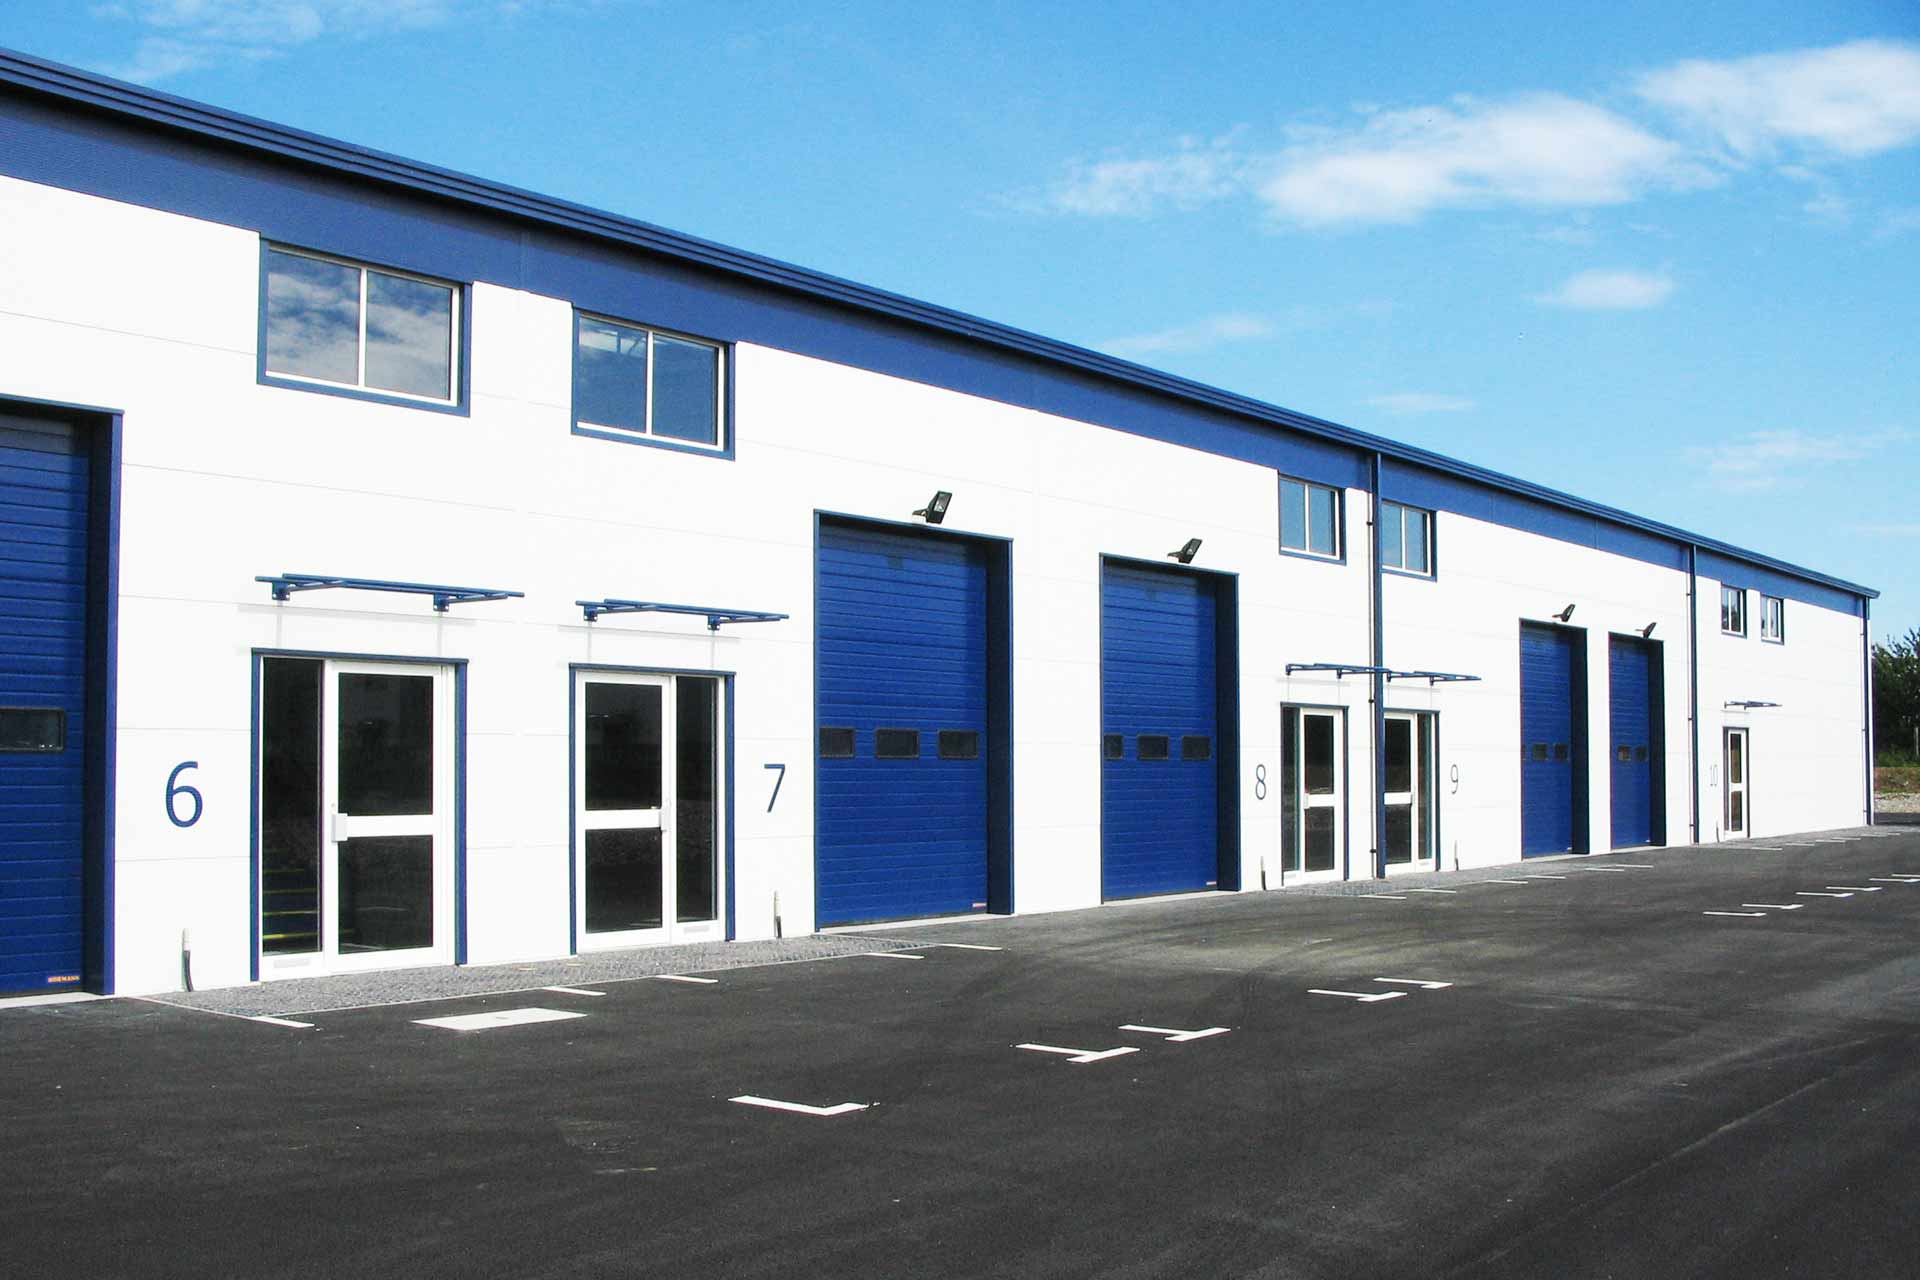 Featured image of completed units at Glenmore Business Park, Cambridge.